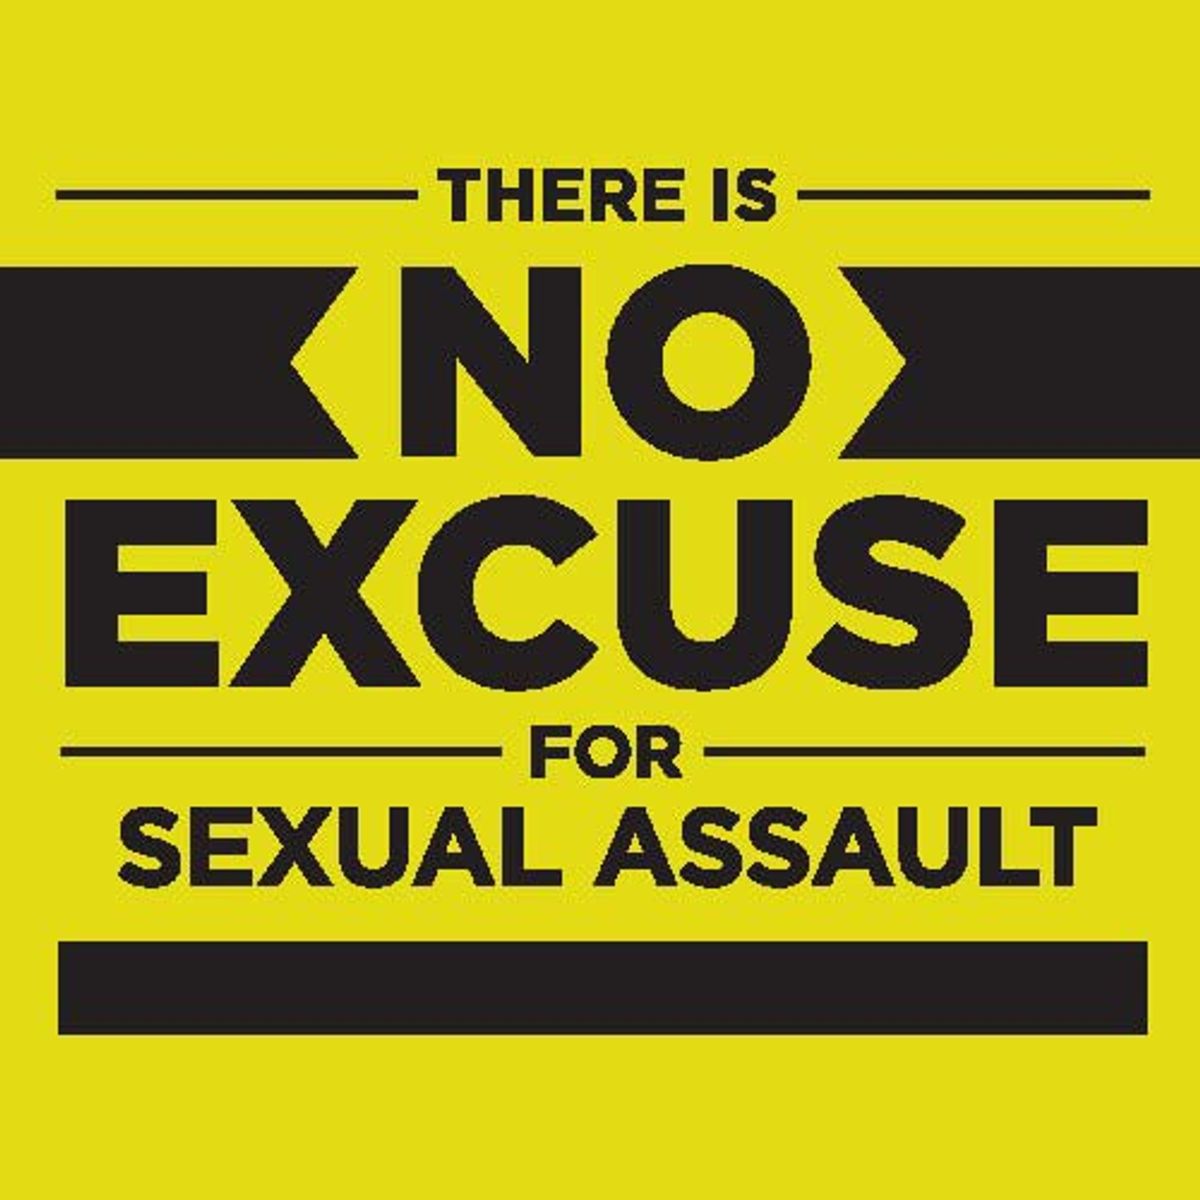 No Excuses: Why Sexual Assault Is NOT A Misunderstanding